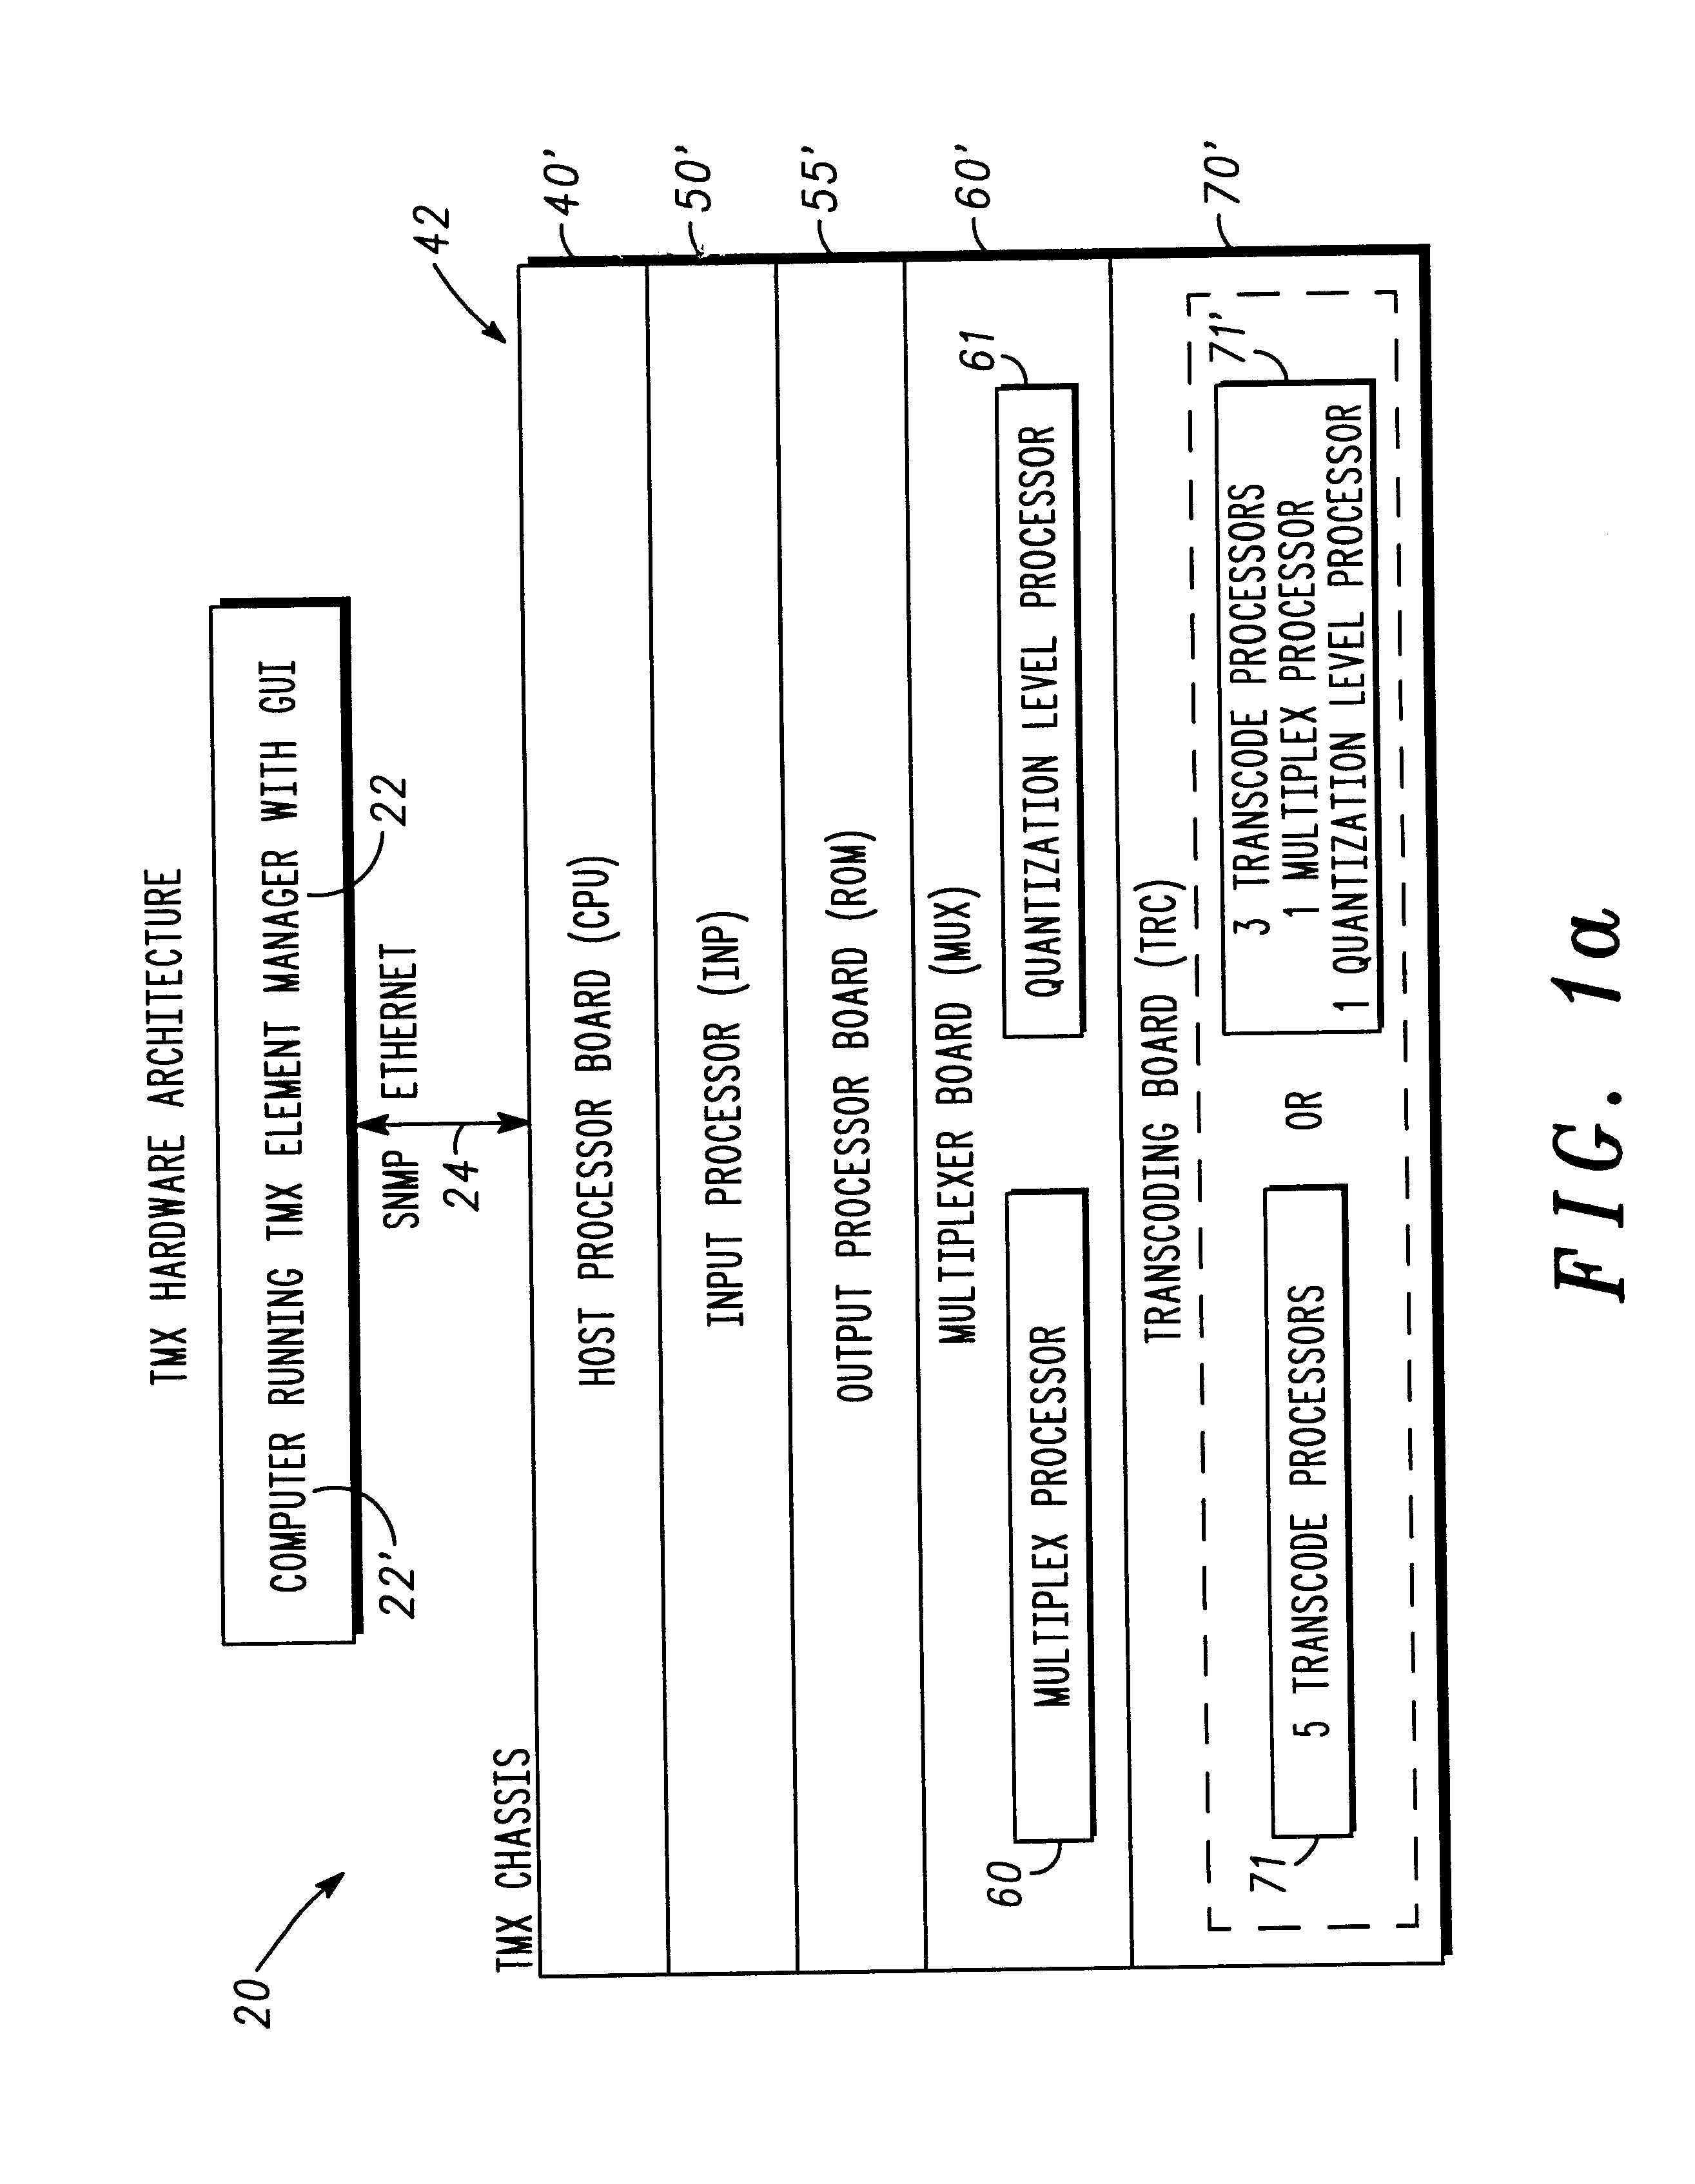 Real-time display of bandwidth utilization in a transport multiplexer